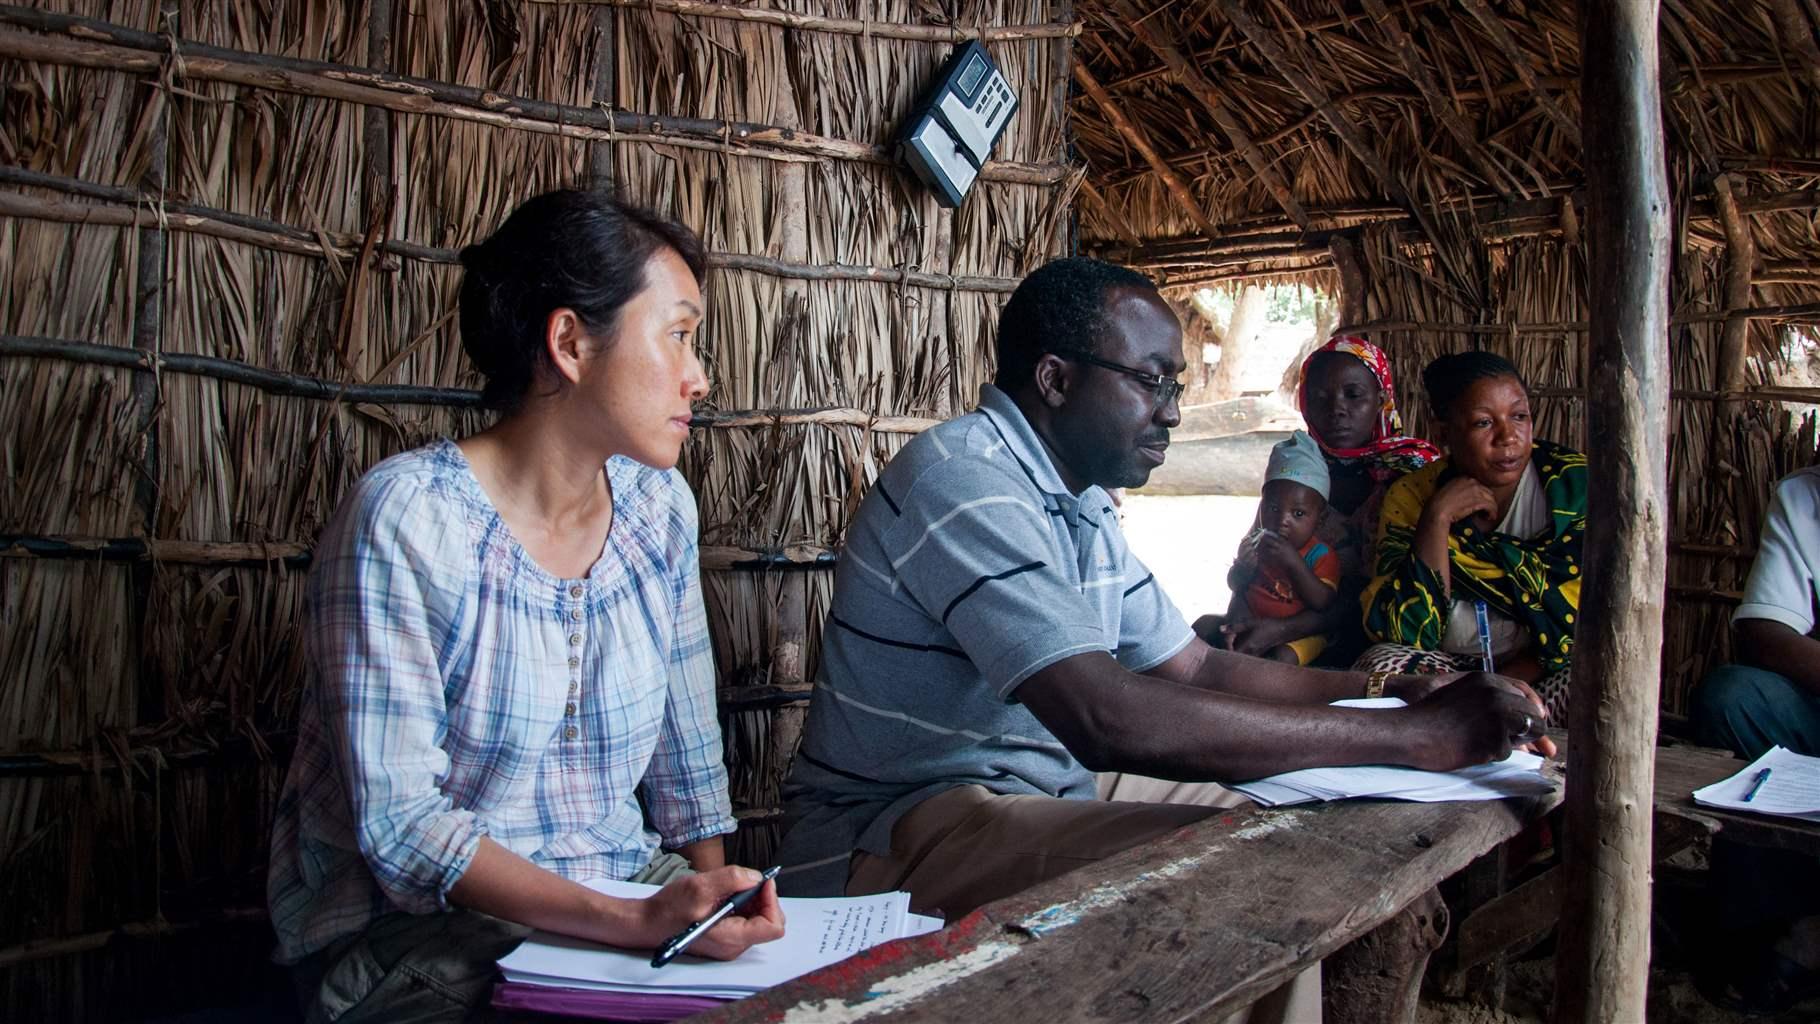 A woman and a man take notes while sitting inside a wooden hut, with a few other people and a young child seated to the side of them in the room.